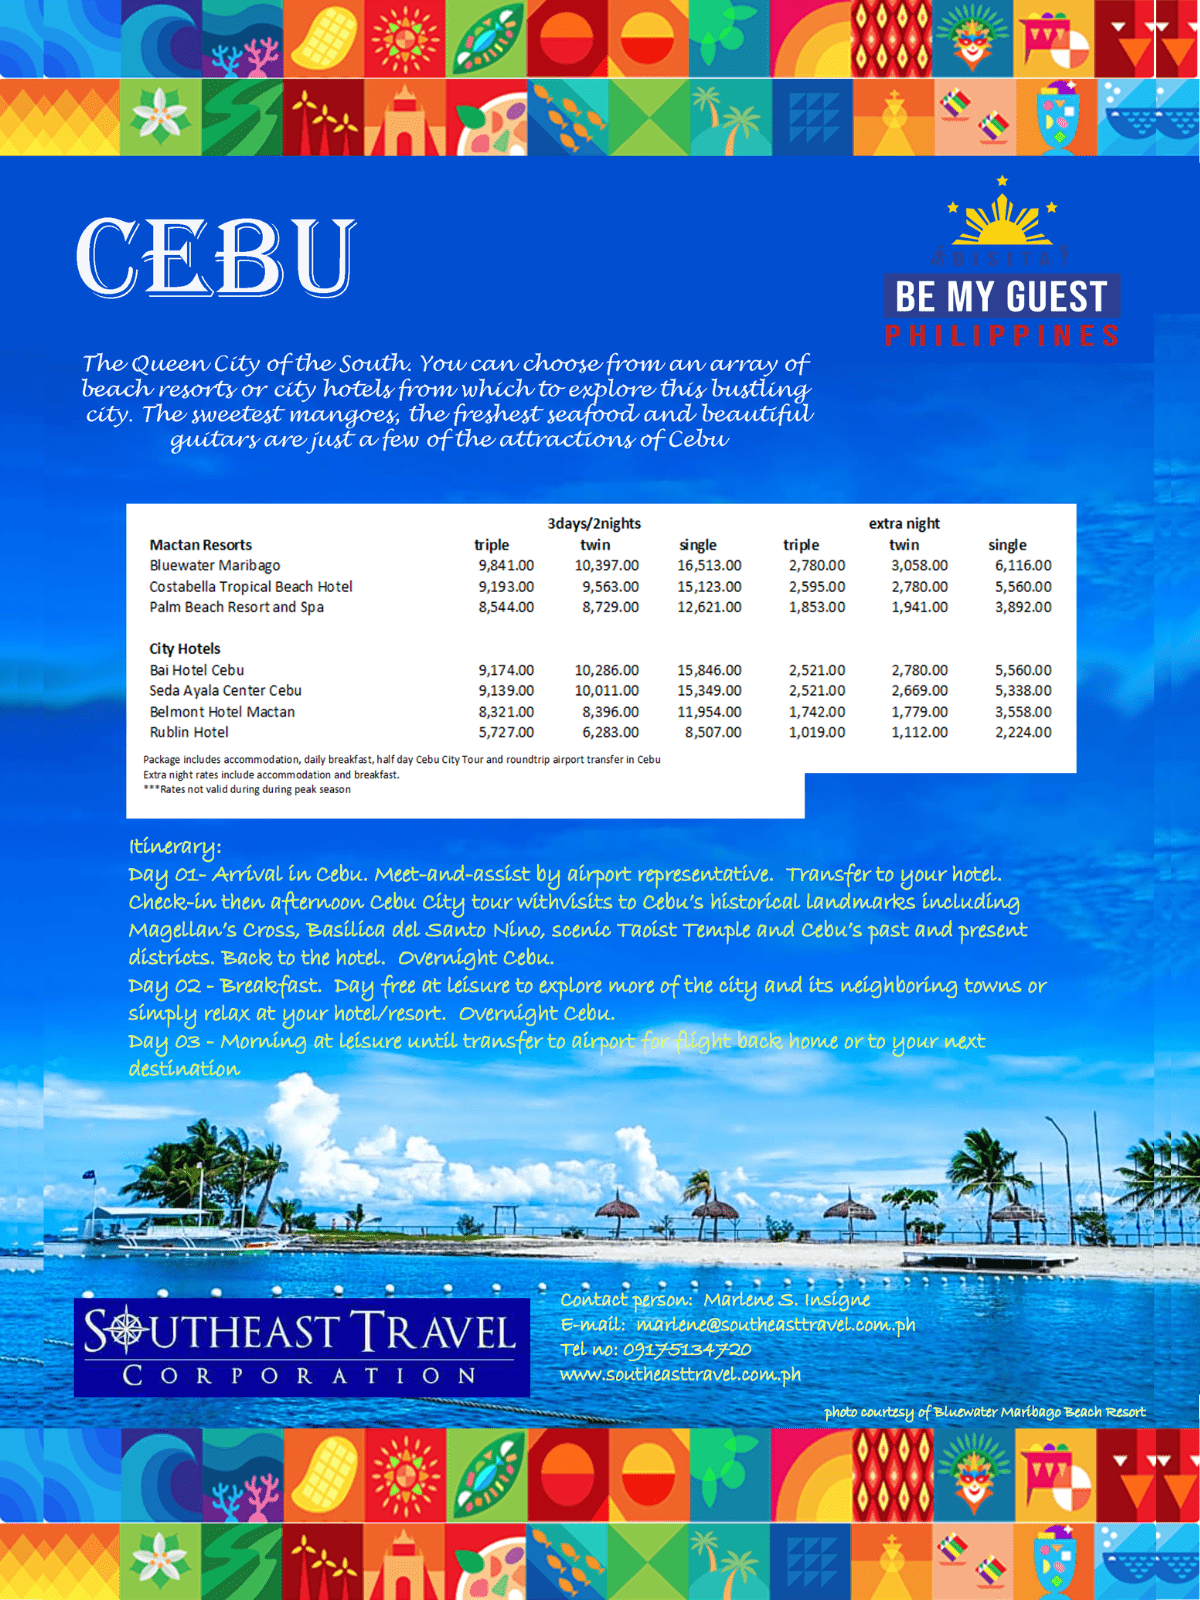 Cebu Tour Package for BBMG